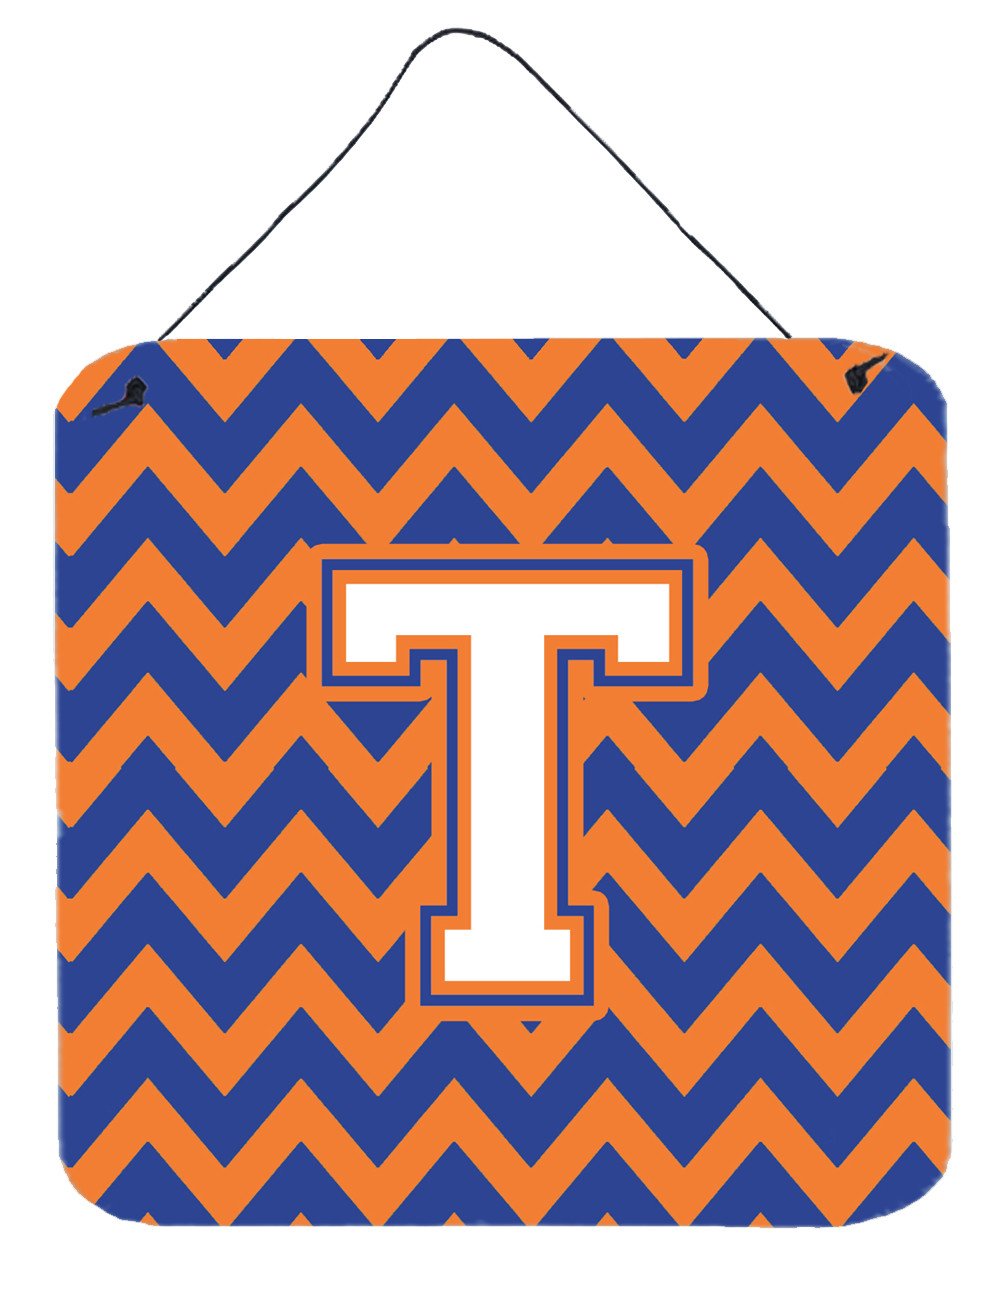 Letter T Chevron Blue and Orange #3 Wall or Door Hanging Prints CJ1060-TDS66 by Caroline's Treasures